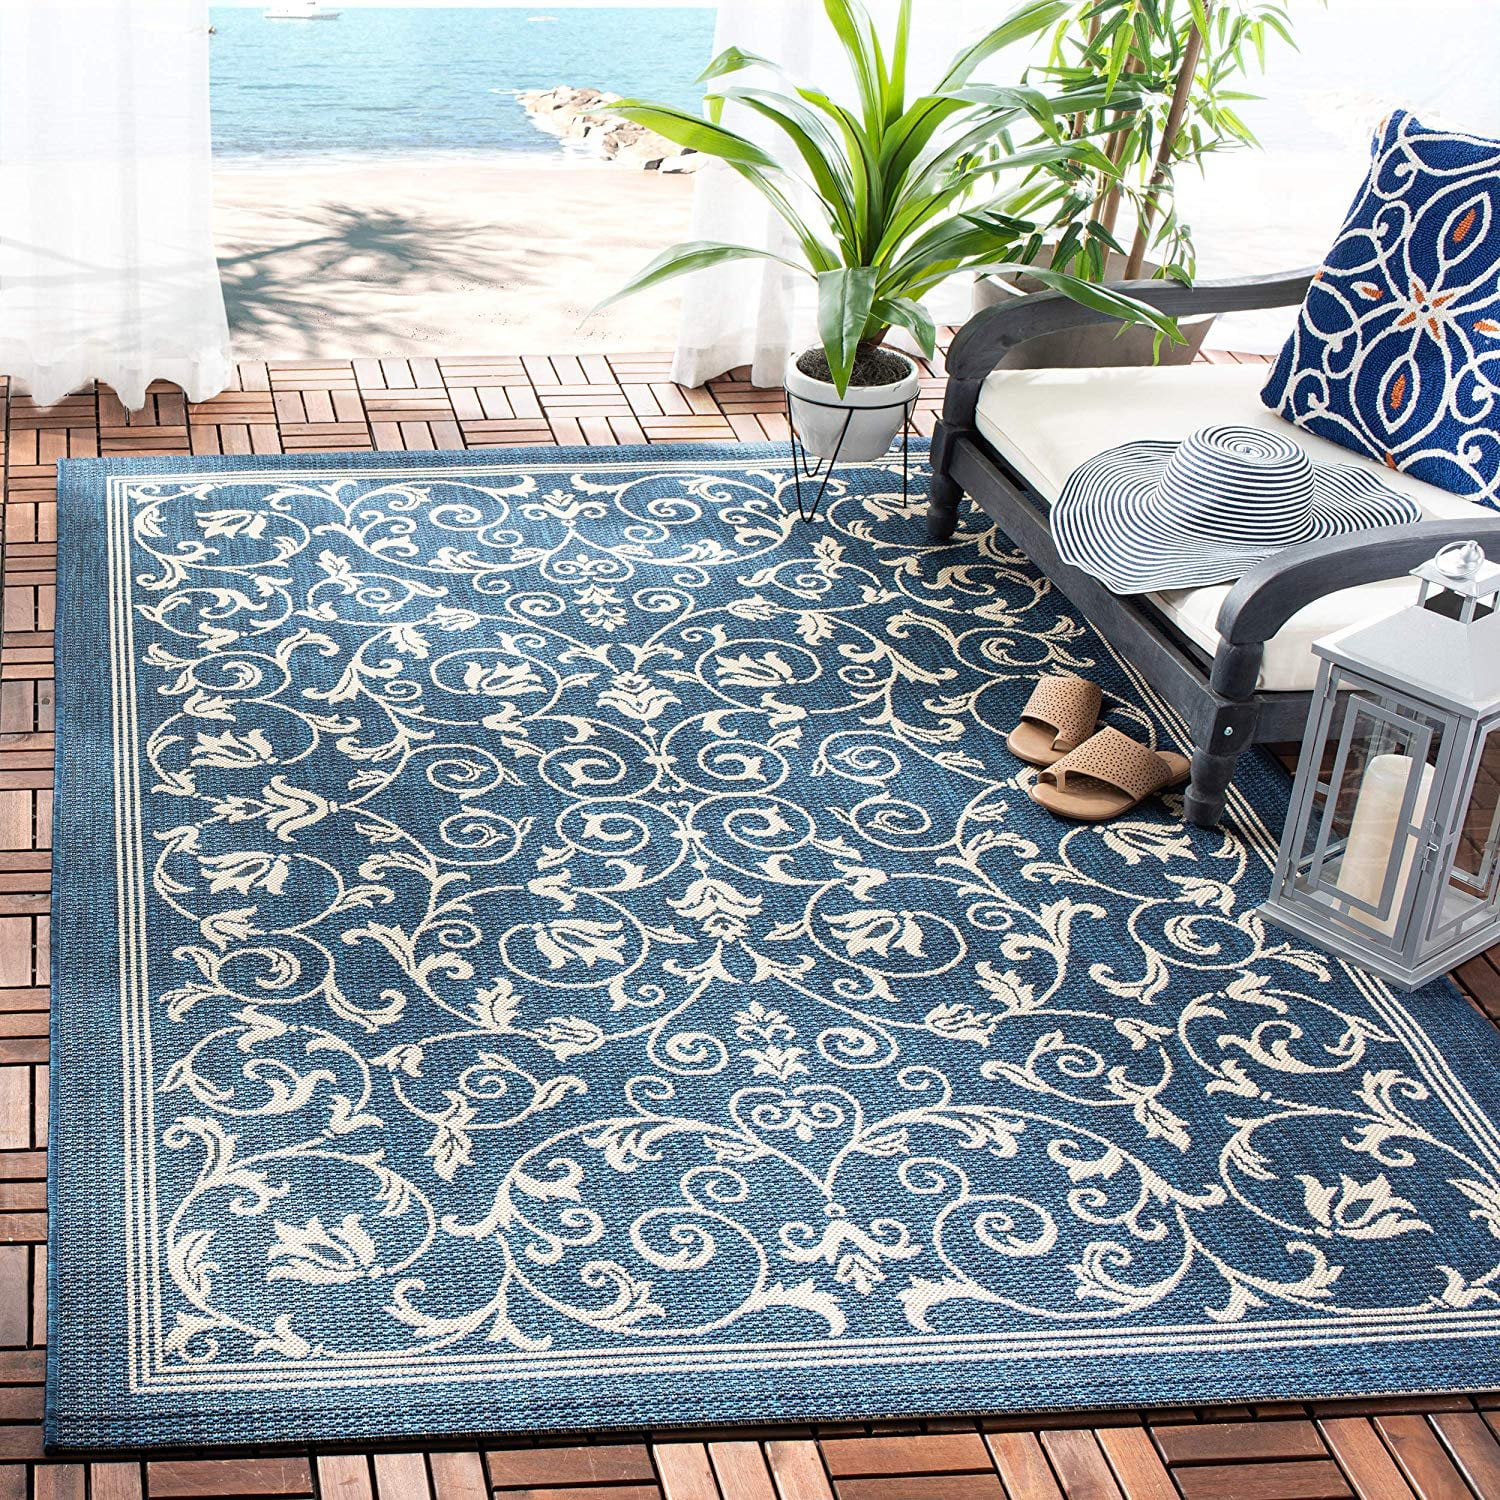 Olive Area Rugs Safavieh Indoor Cy2098-1e01 for sale online Outdoor Natural